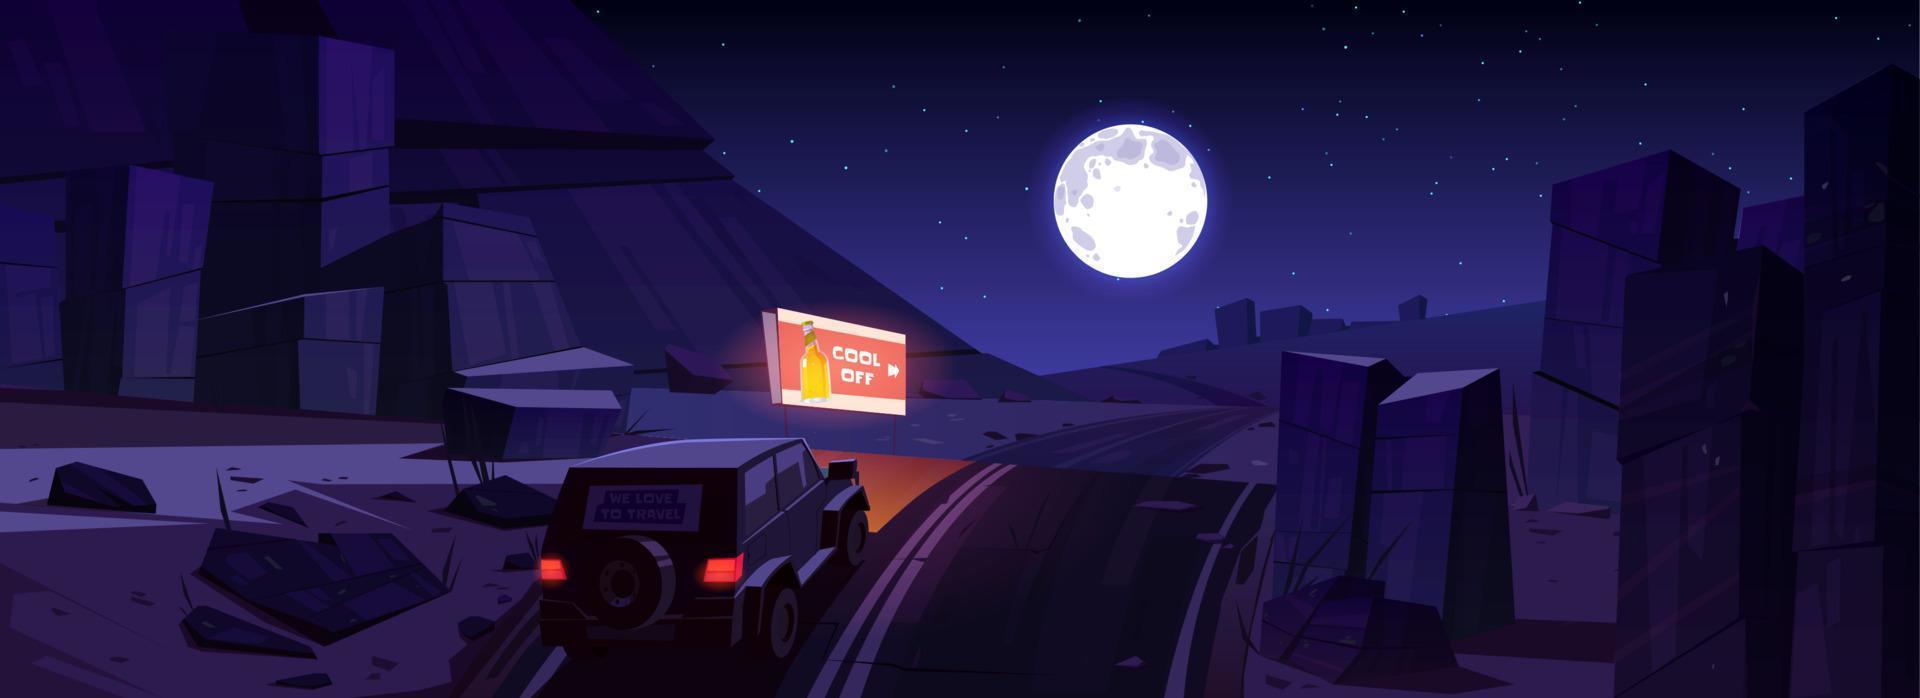 Night desert with car on road and billboard vector